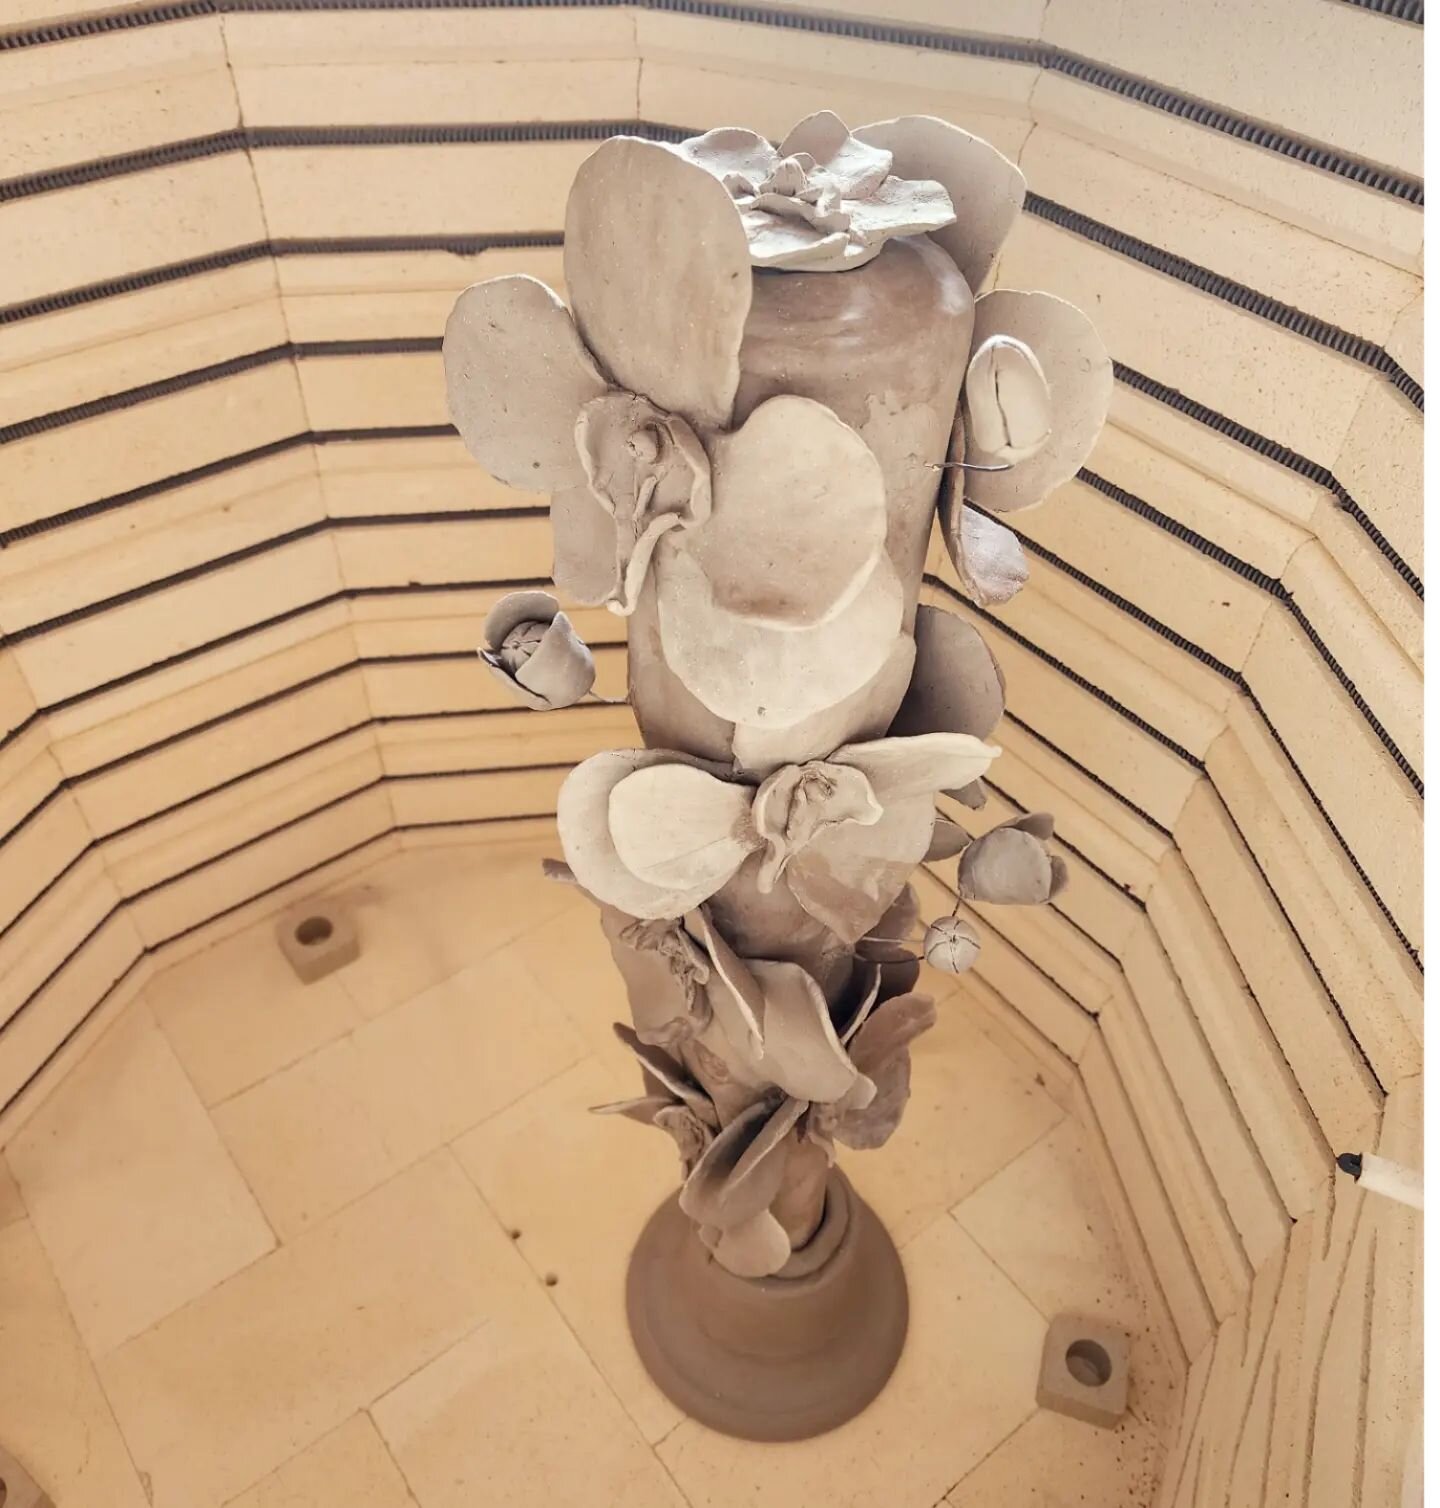 Our member, Mary, just put the finishing touches on her first sculpture, and we are so excited for her to decorate it once bisque fired!
.
.
 She took her first hand-building class with @momojanssen in her beginners slab course and continued onto the